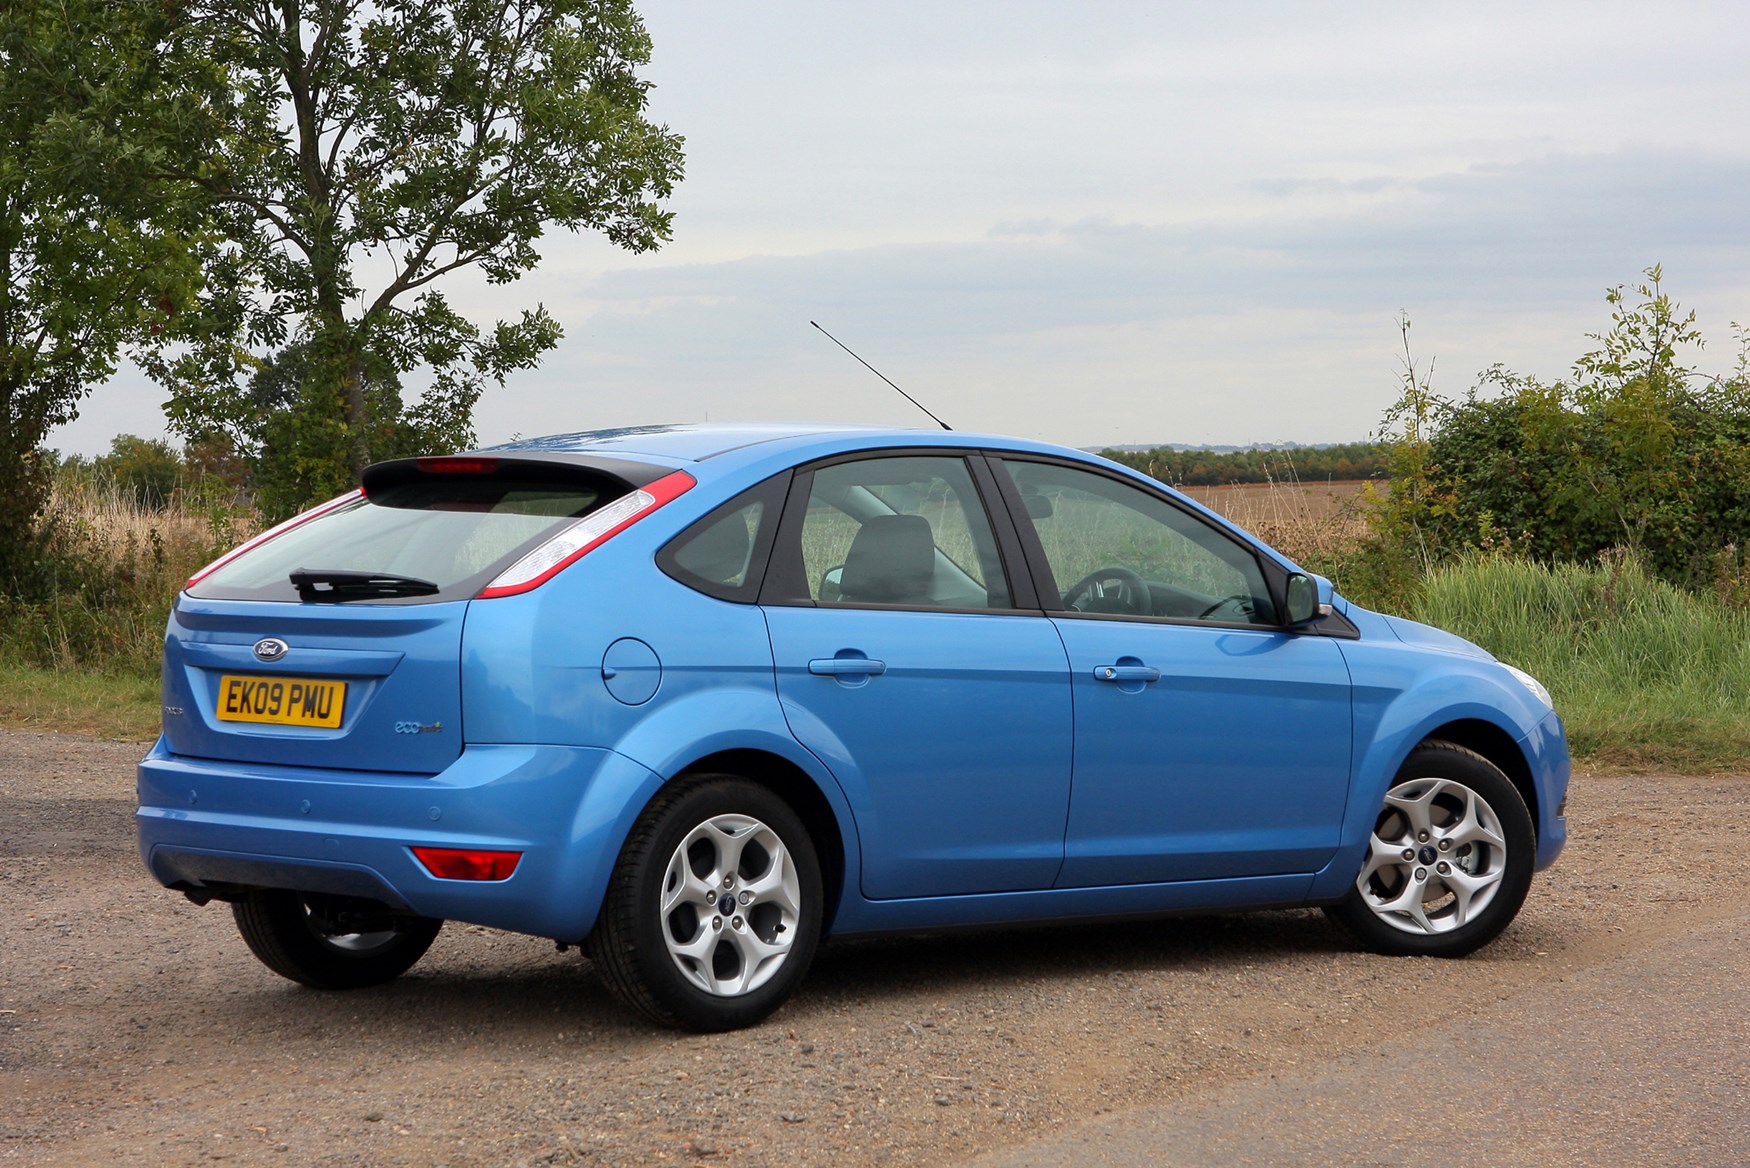 Used Ford Focus Hatchback (2005 - 2011) Review | Parkers